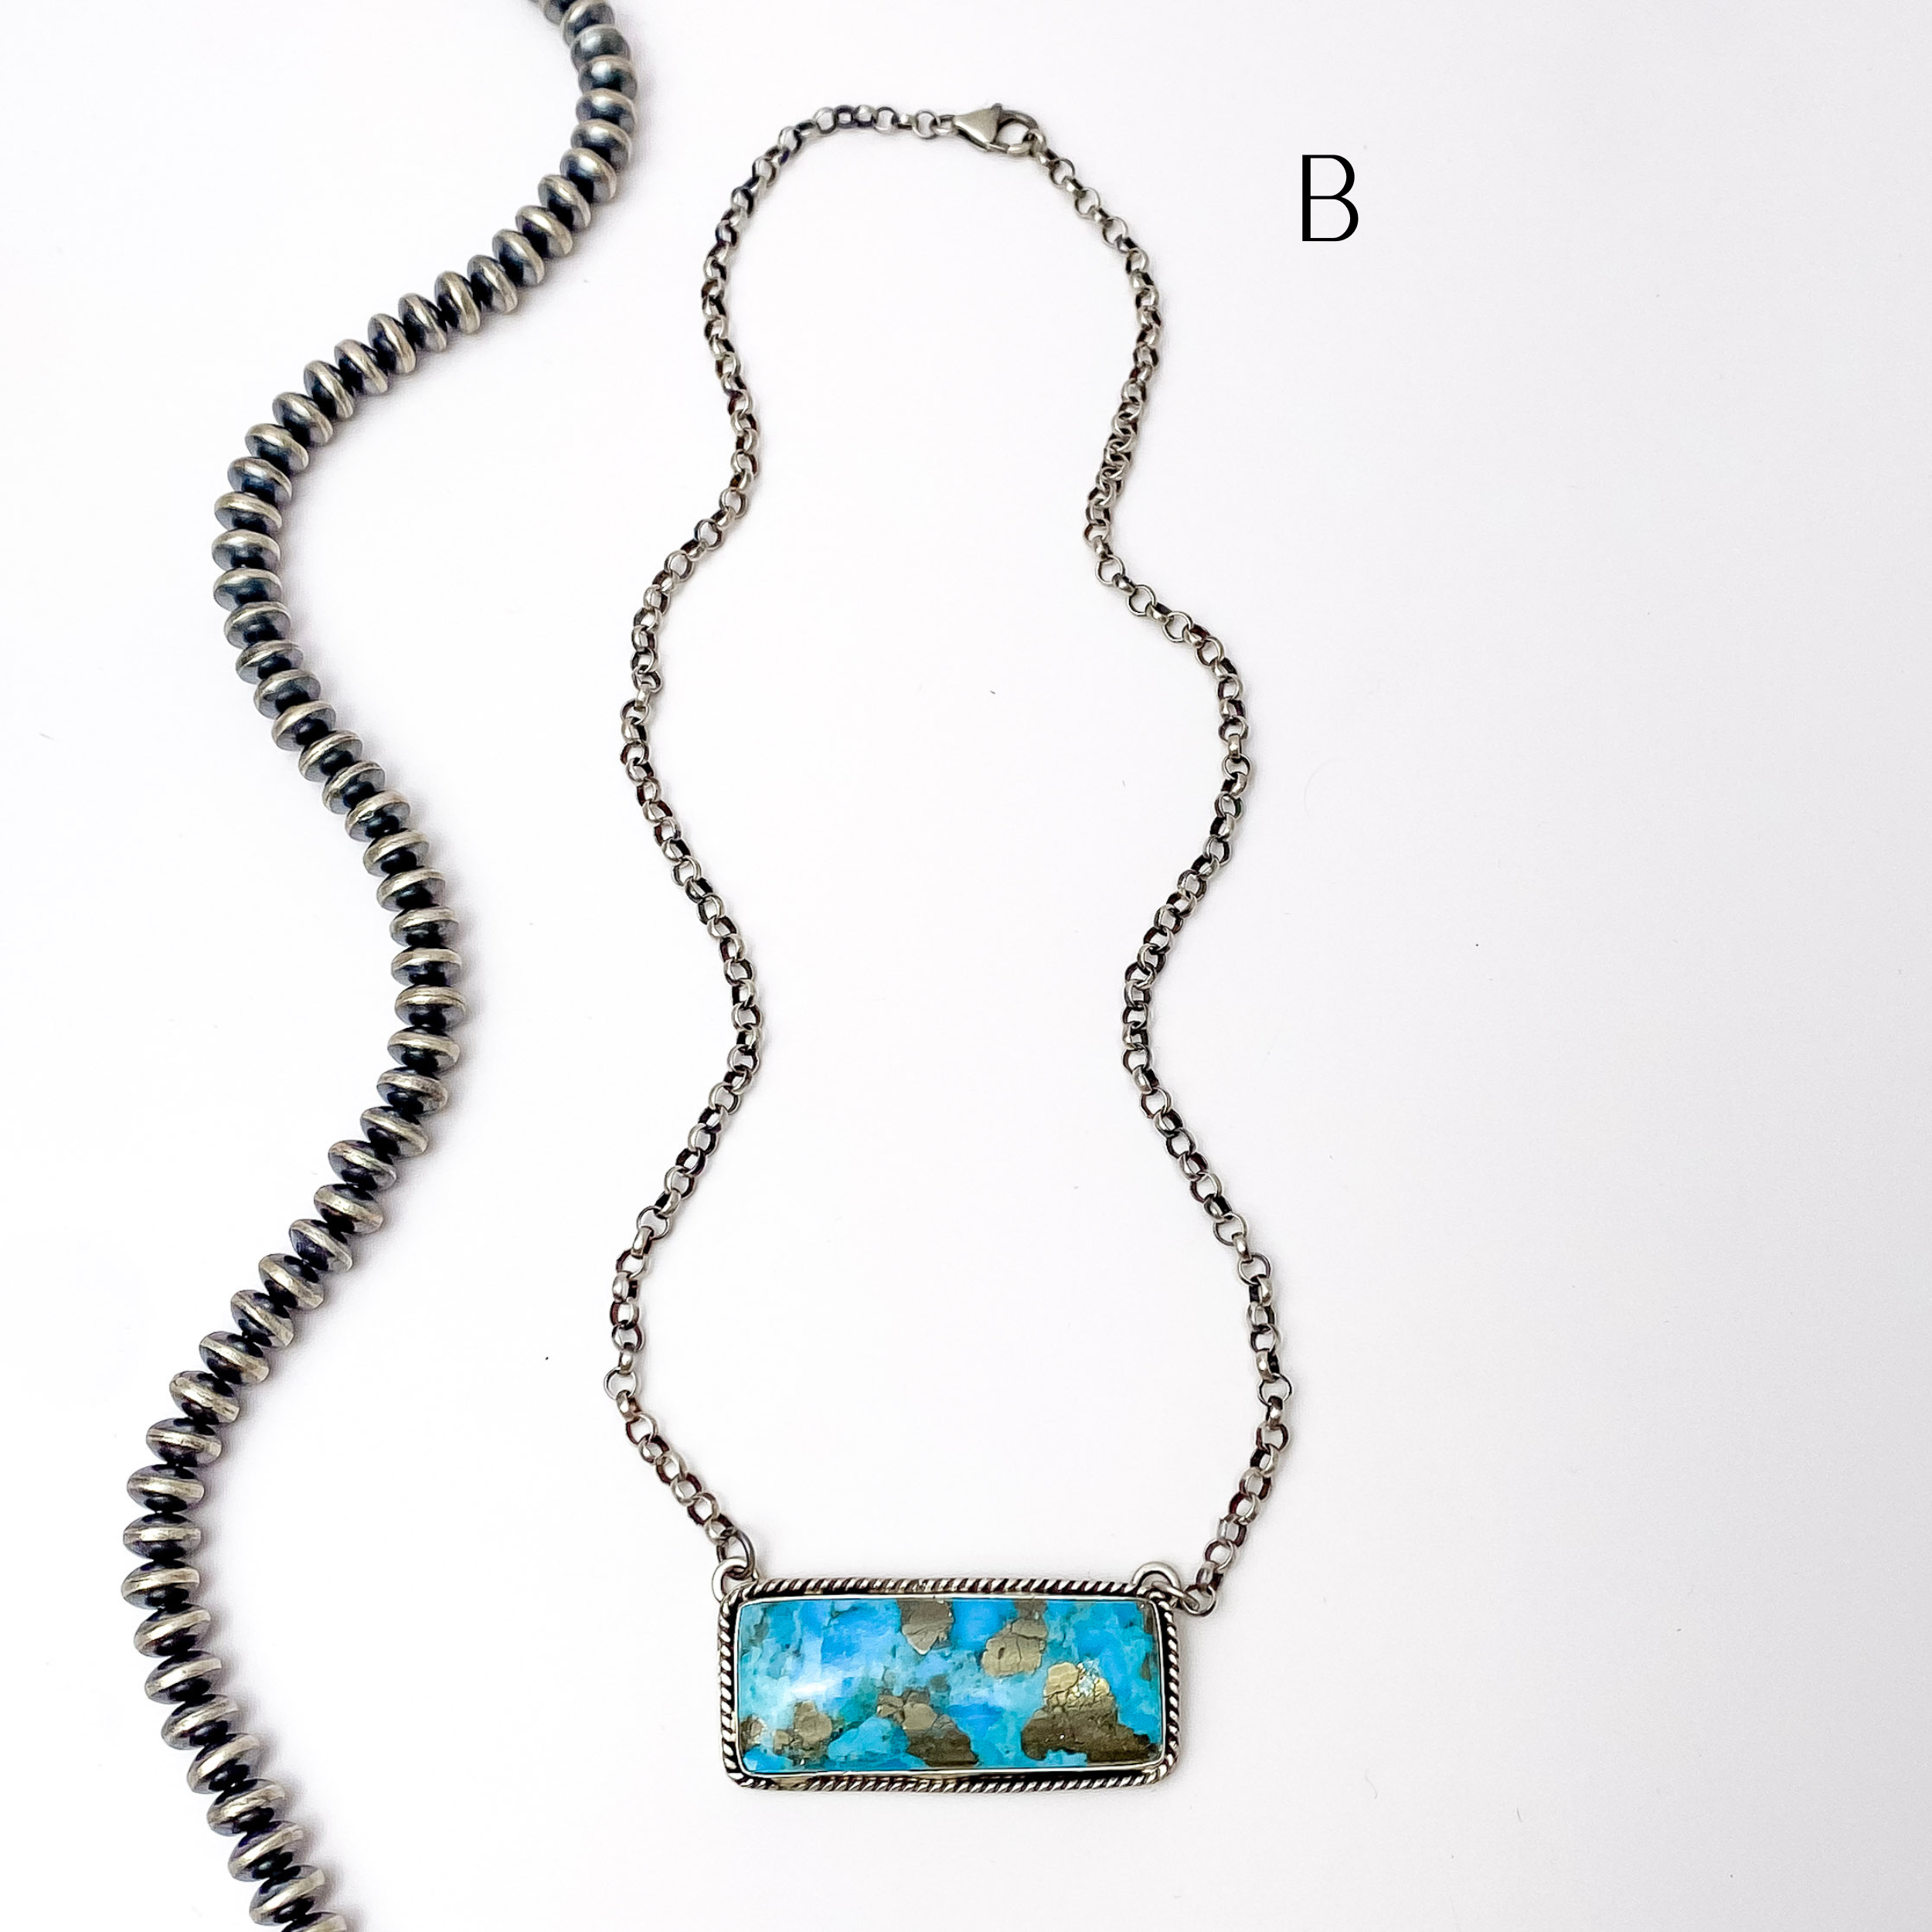 P Yazzie | Navajo Handmade Sterling Silver Chain Necklace with Kingman Turquoise Bar - Giddy Up Glamour Boutique